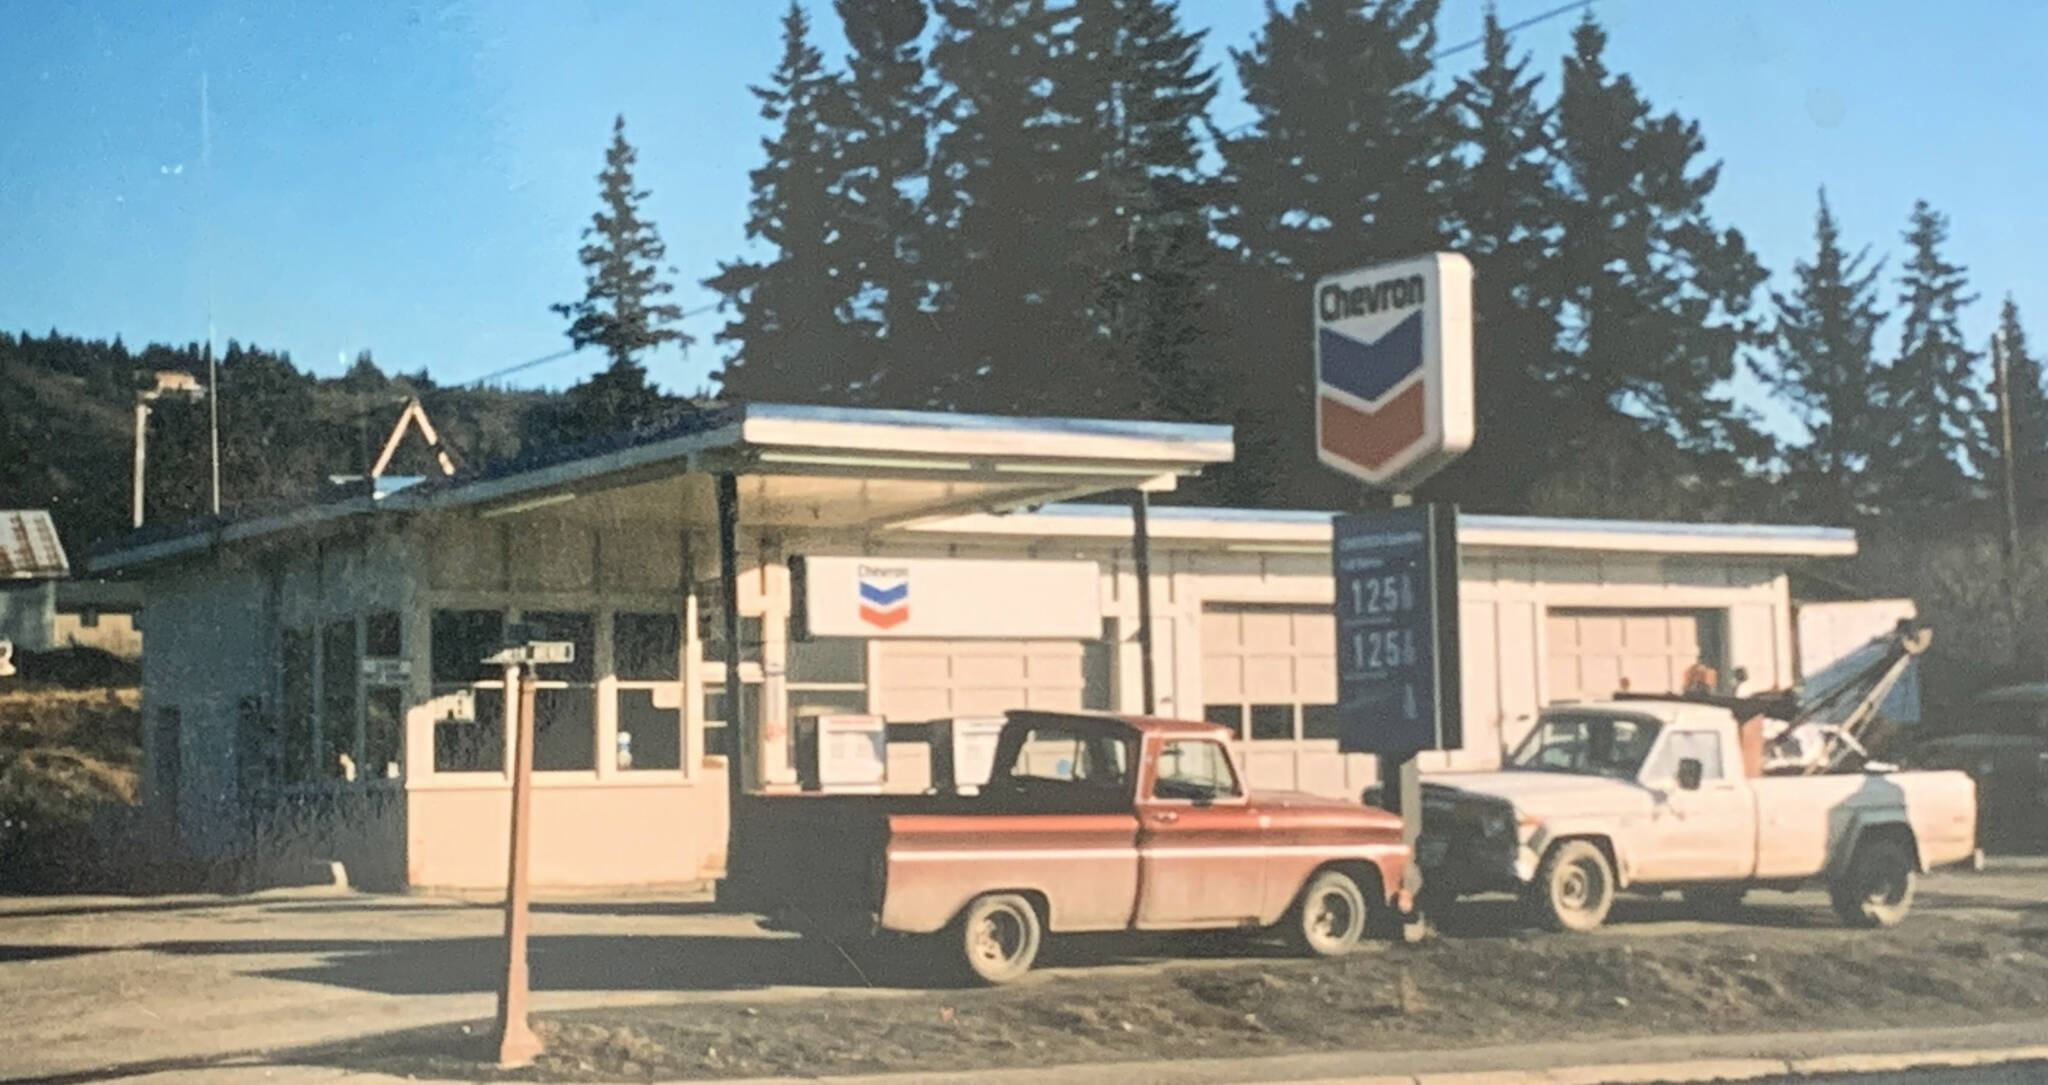 Photo provided by Robert Tarnowske
A photo from the 1980s when Sunny’s Service was a Chevron gas station.